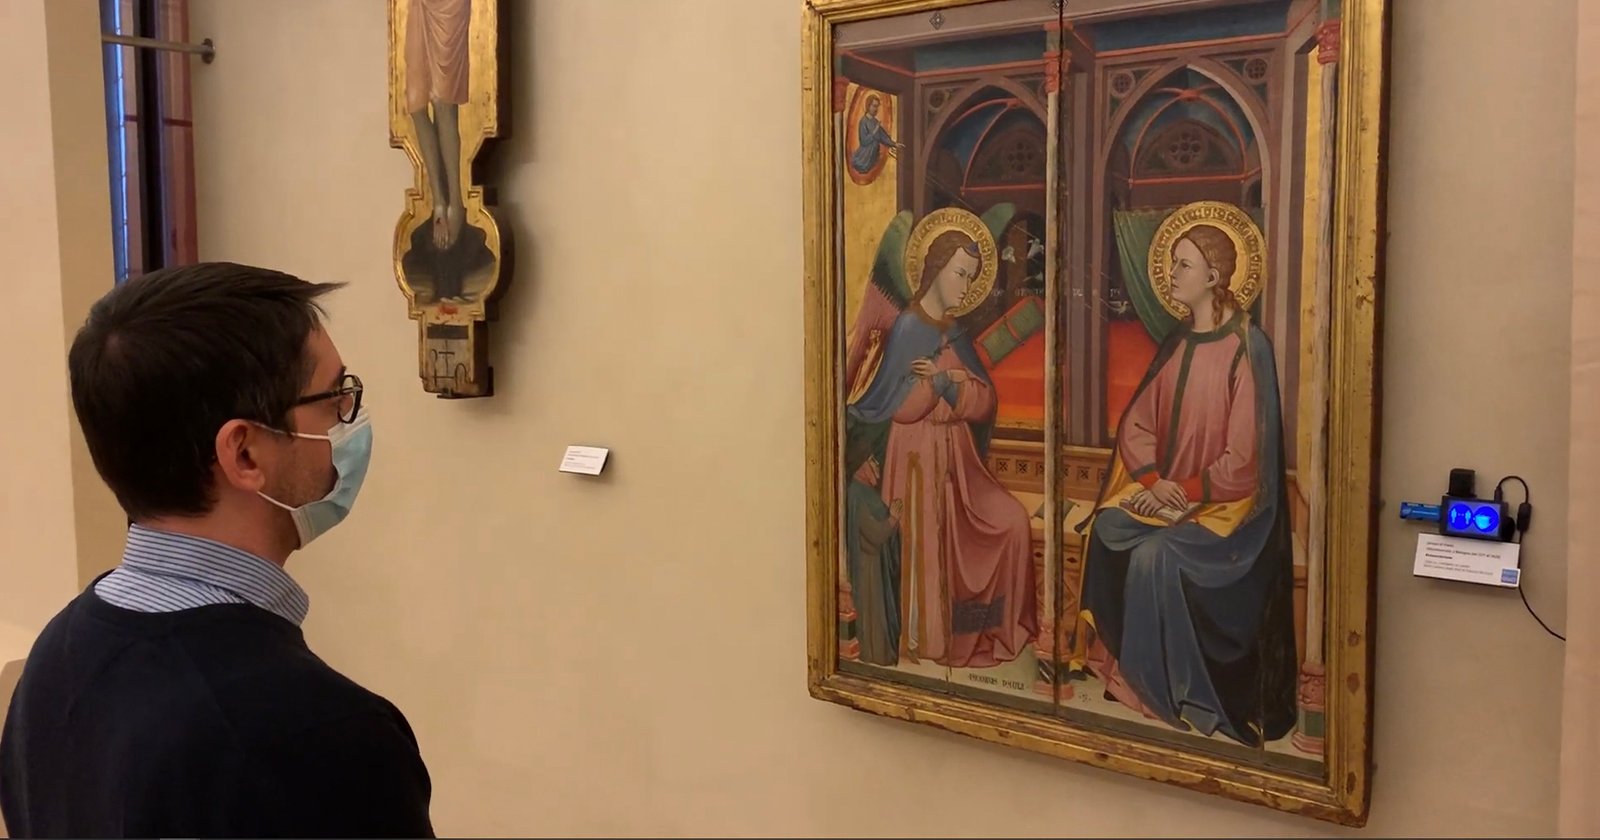 Italian Museums Are Using AI Cameras to Determine if People Like the Art - PetaPixel